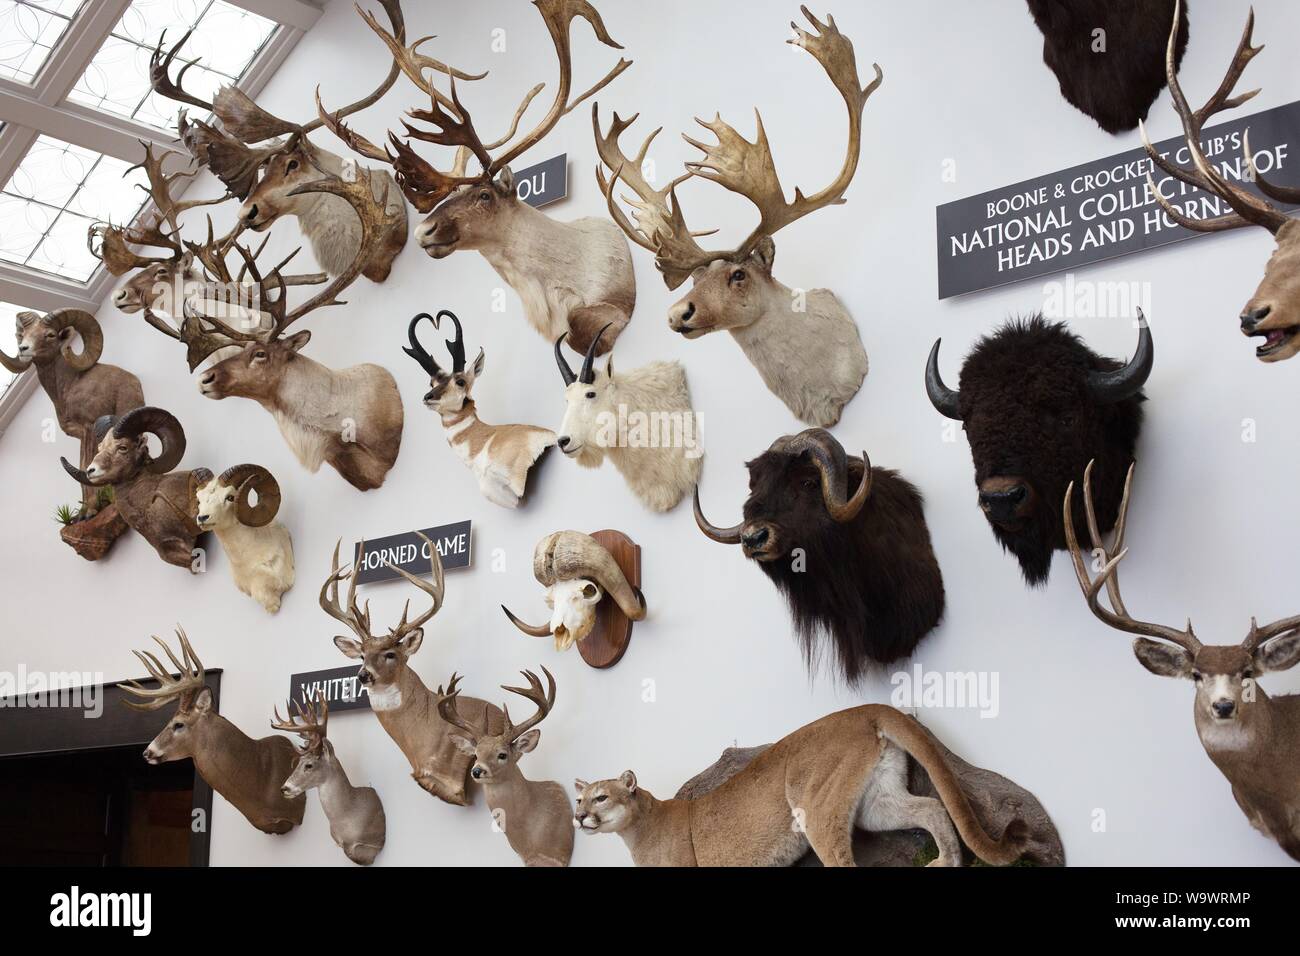 The National Collection of Heads and Horns at Johnny Morris' Wonders of Wildlife National Museum and Aquarium in Springfield, MO, USA. Stock Photo